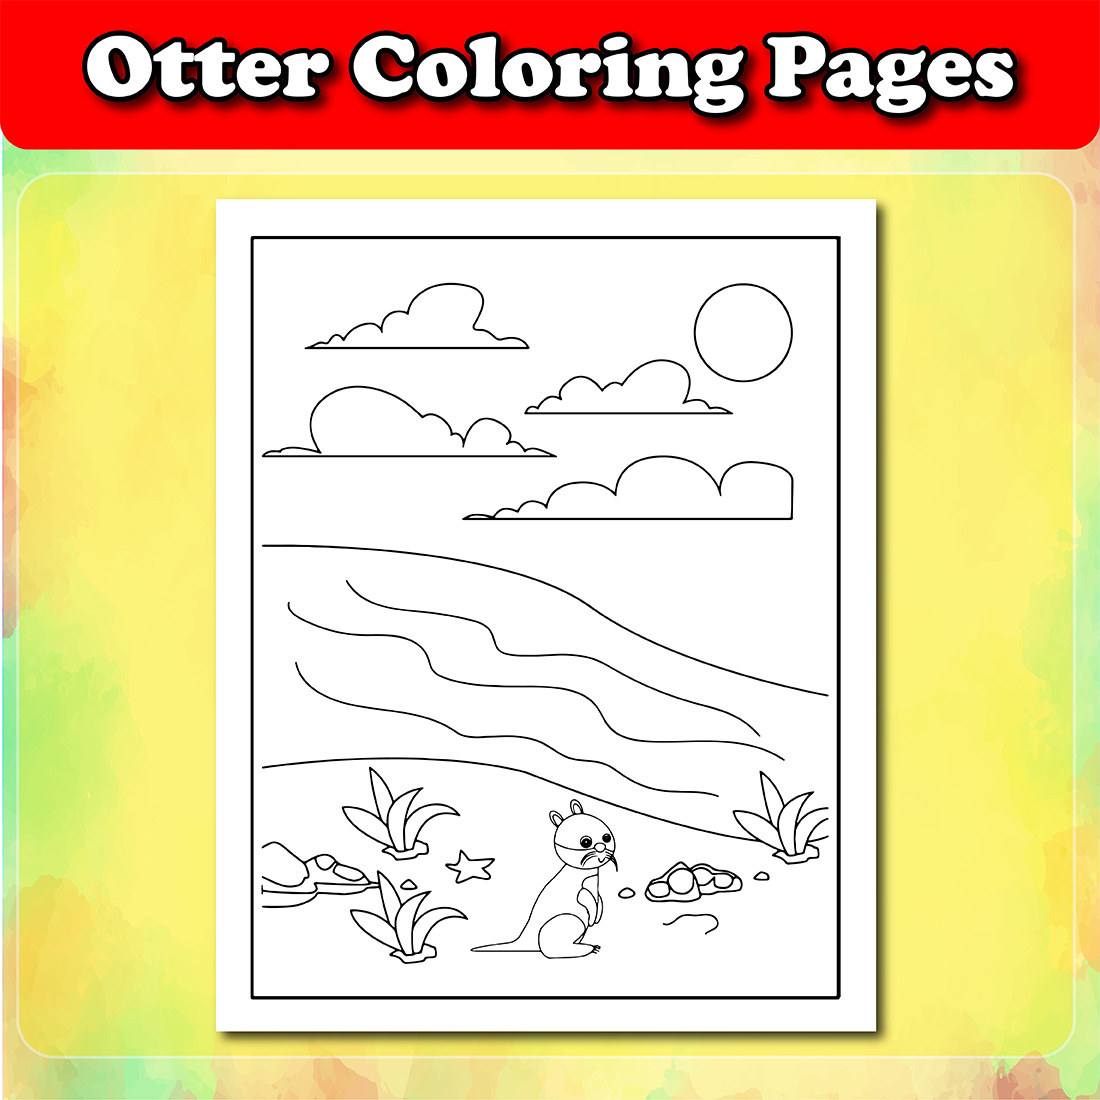 Otter Coloring Pages cover image.